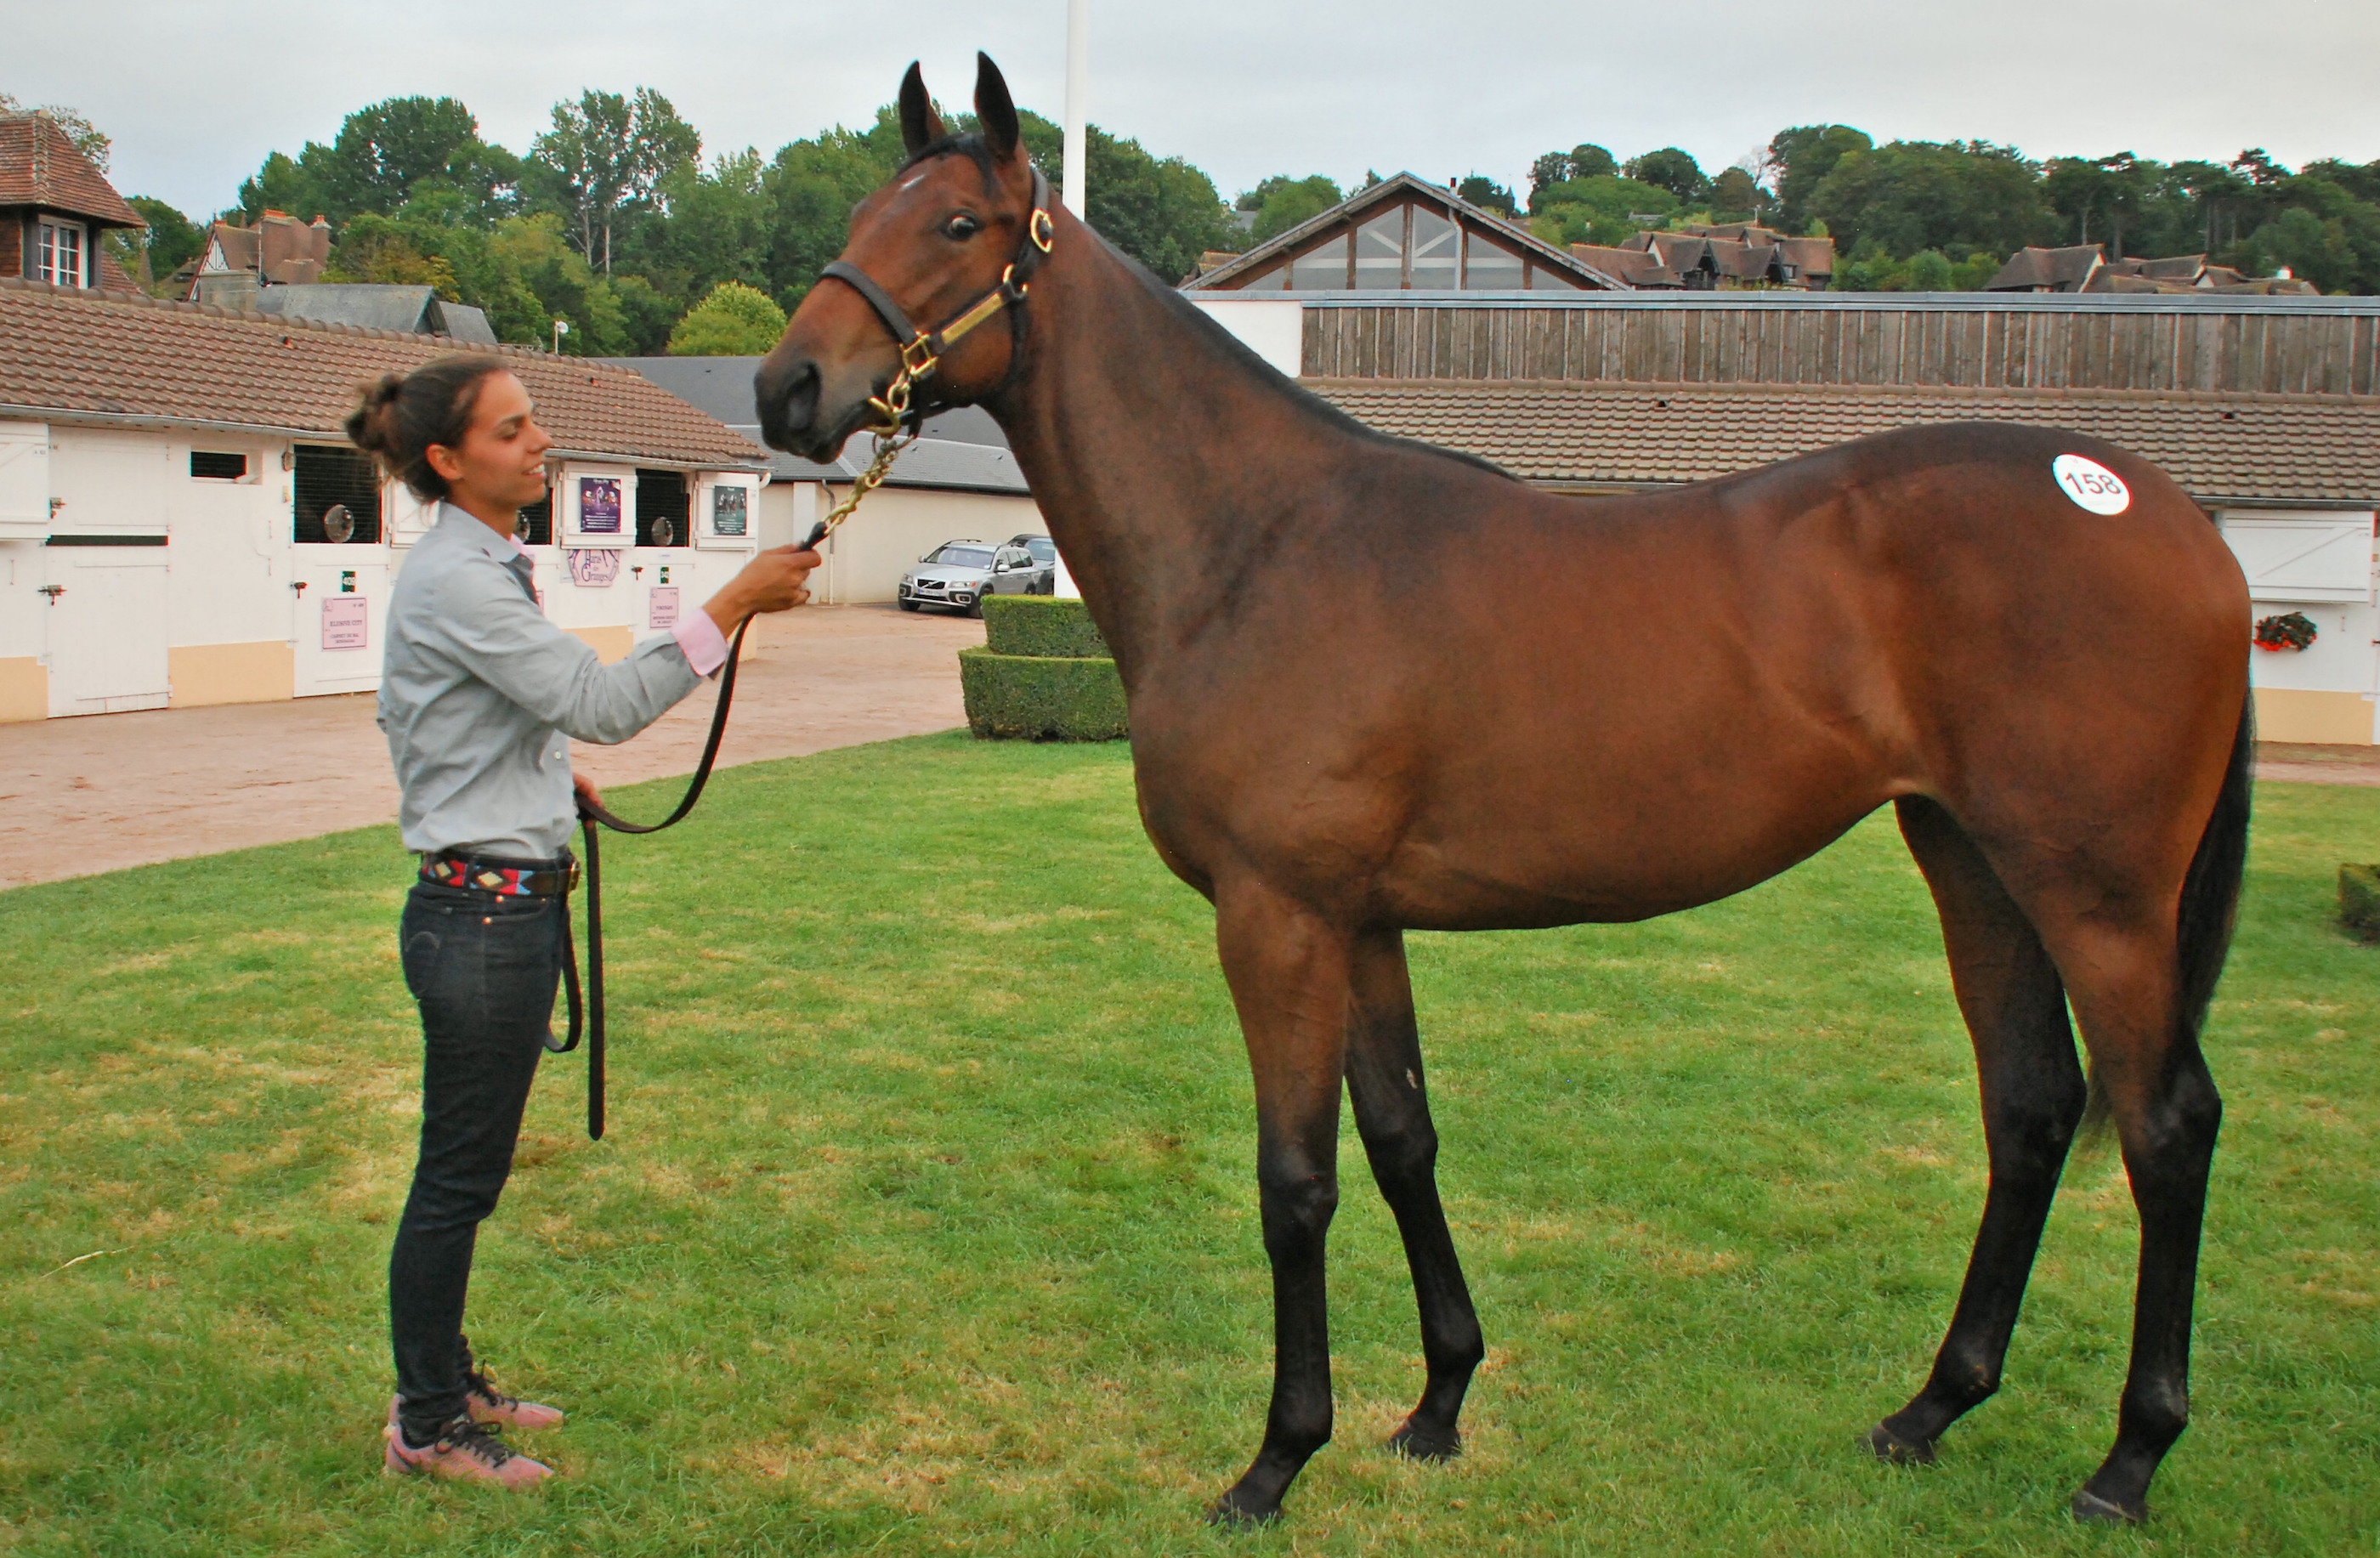 Selling well in Europe: This American Pharoah filly out of Marbre Rose went for €850,000 at the Arqana yearling sales in France in August 2018. Now named Lashara and trained by Mark Casse, she has won twice. Photo: John Gilmore